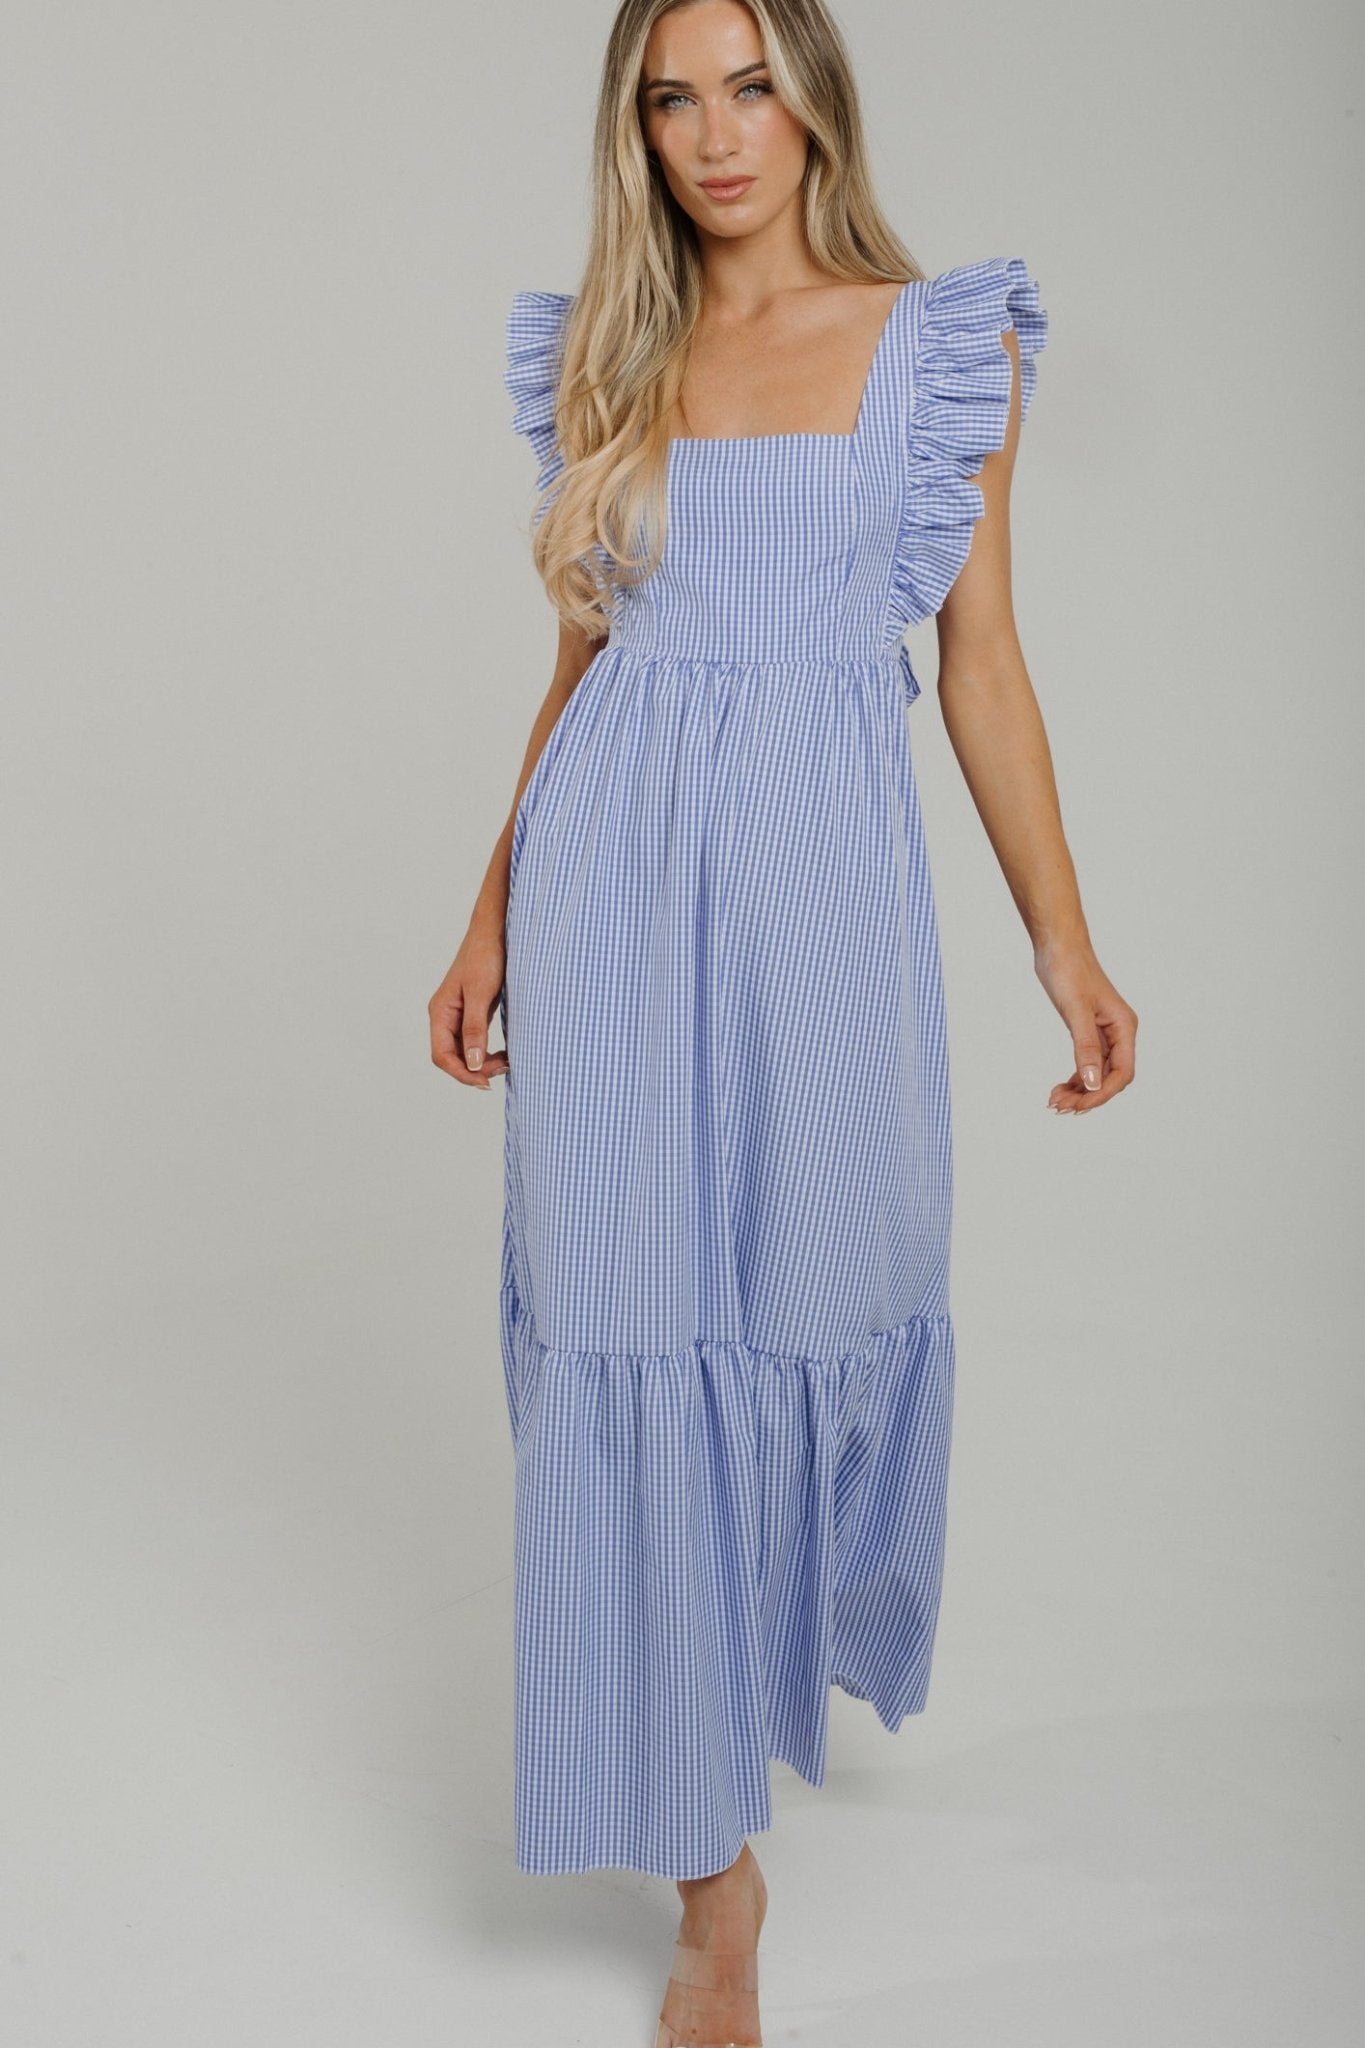 Indie Frill Sleeve Dress In Blue Gingham - The Walk in Wardrobe